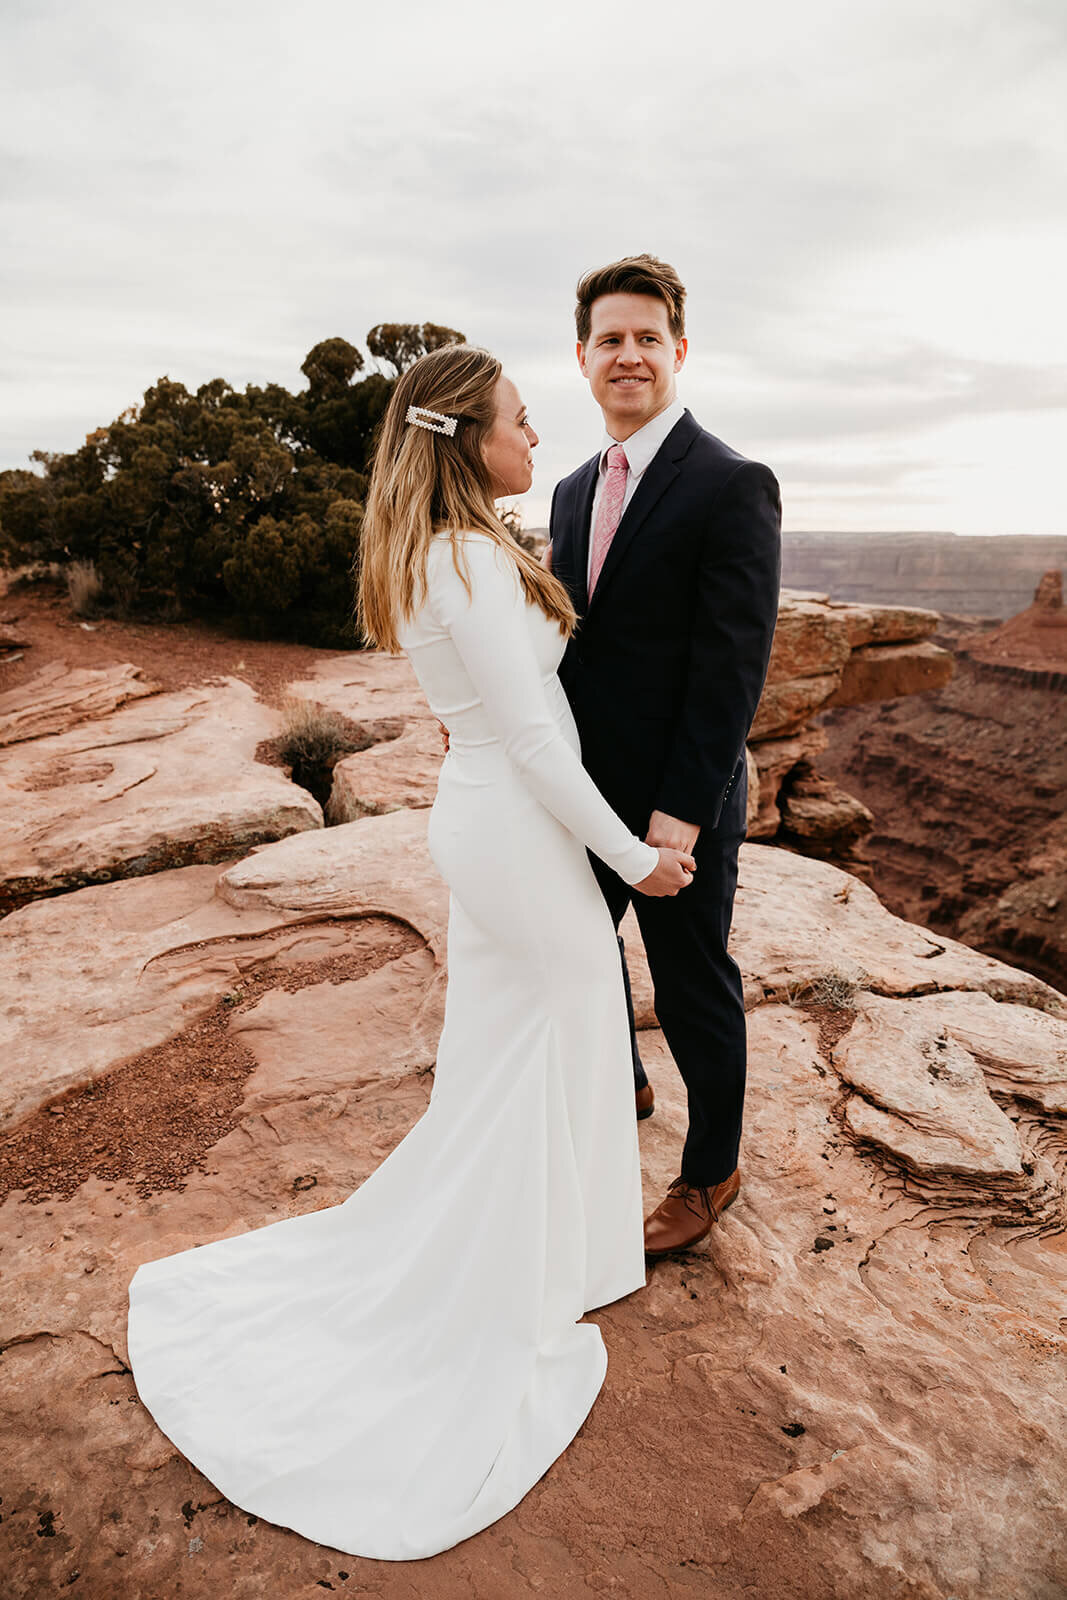  Couple celebrates anniversary at Dead Horse Point State Park and the La Sal Mountains near Moab, Utah with incredible views and hiking. Utah elopement photographer 